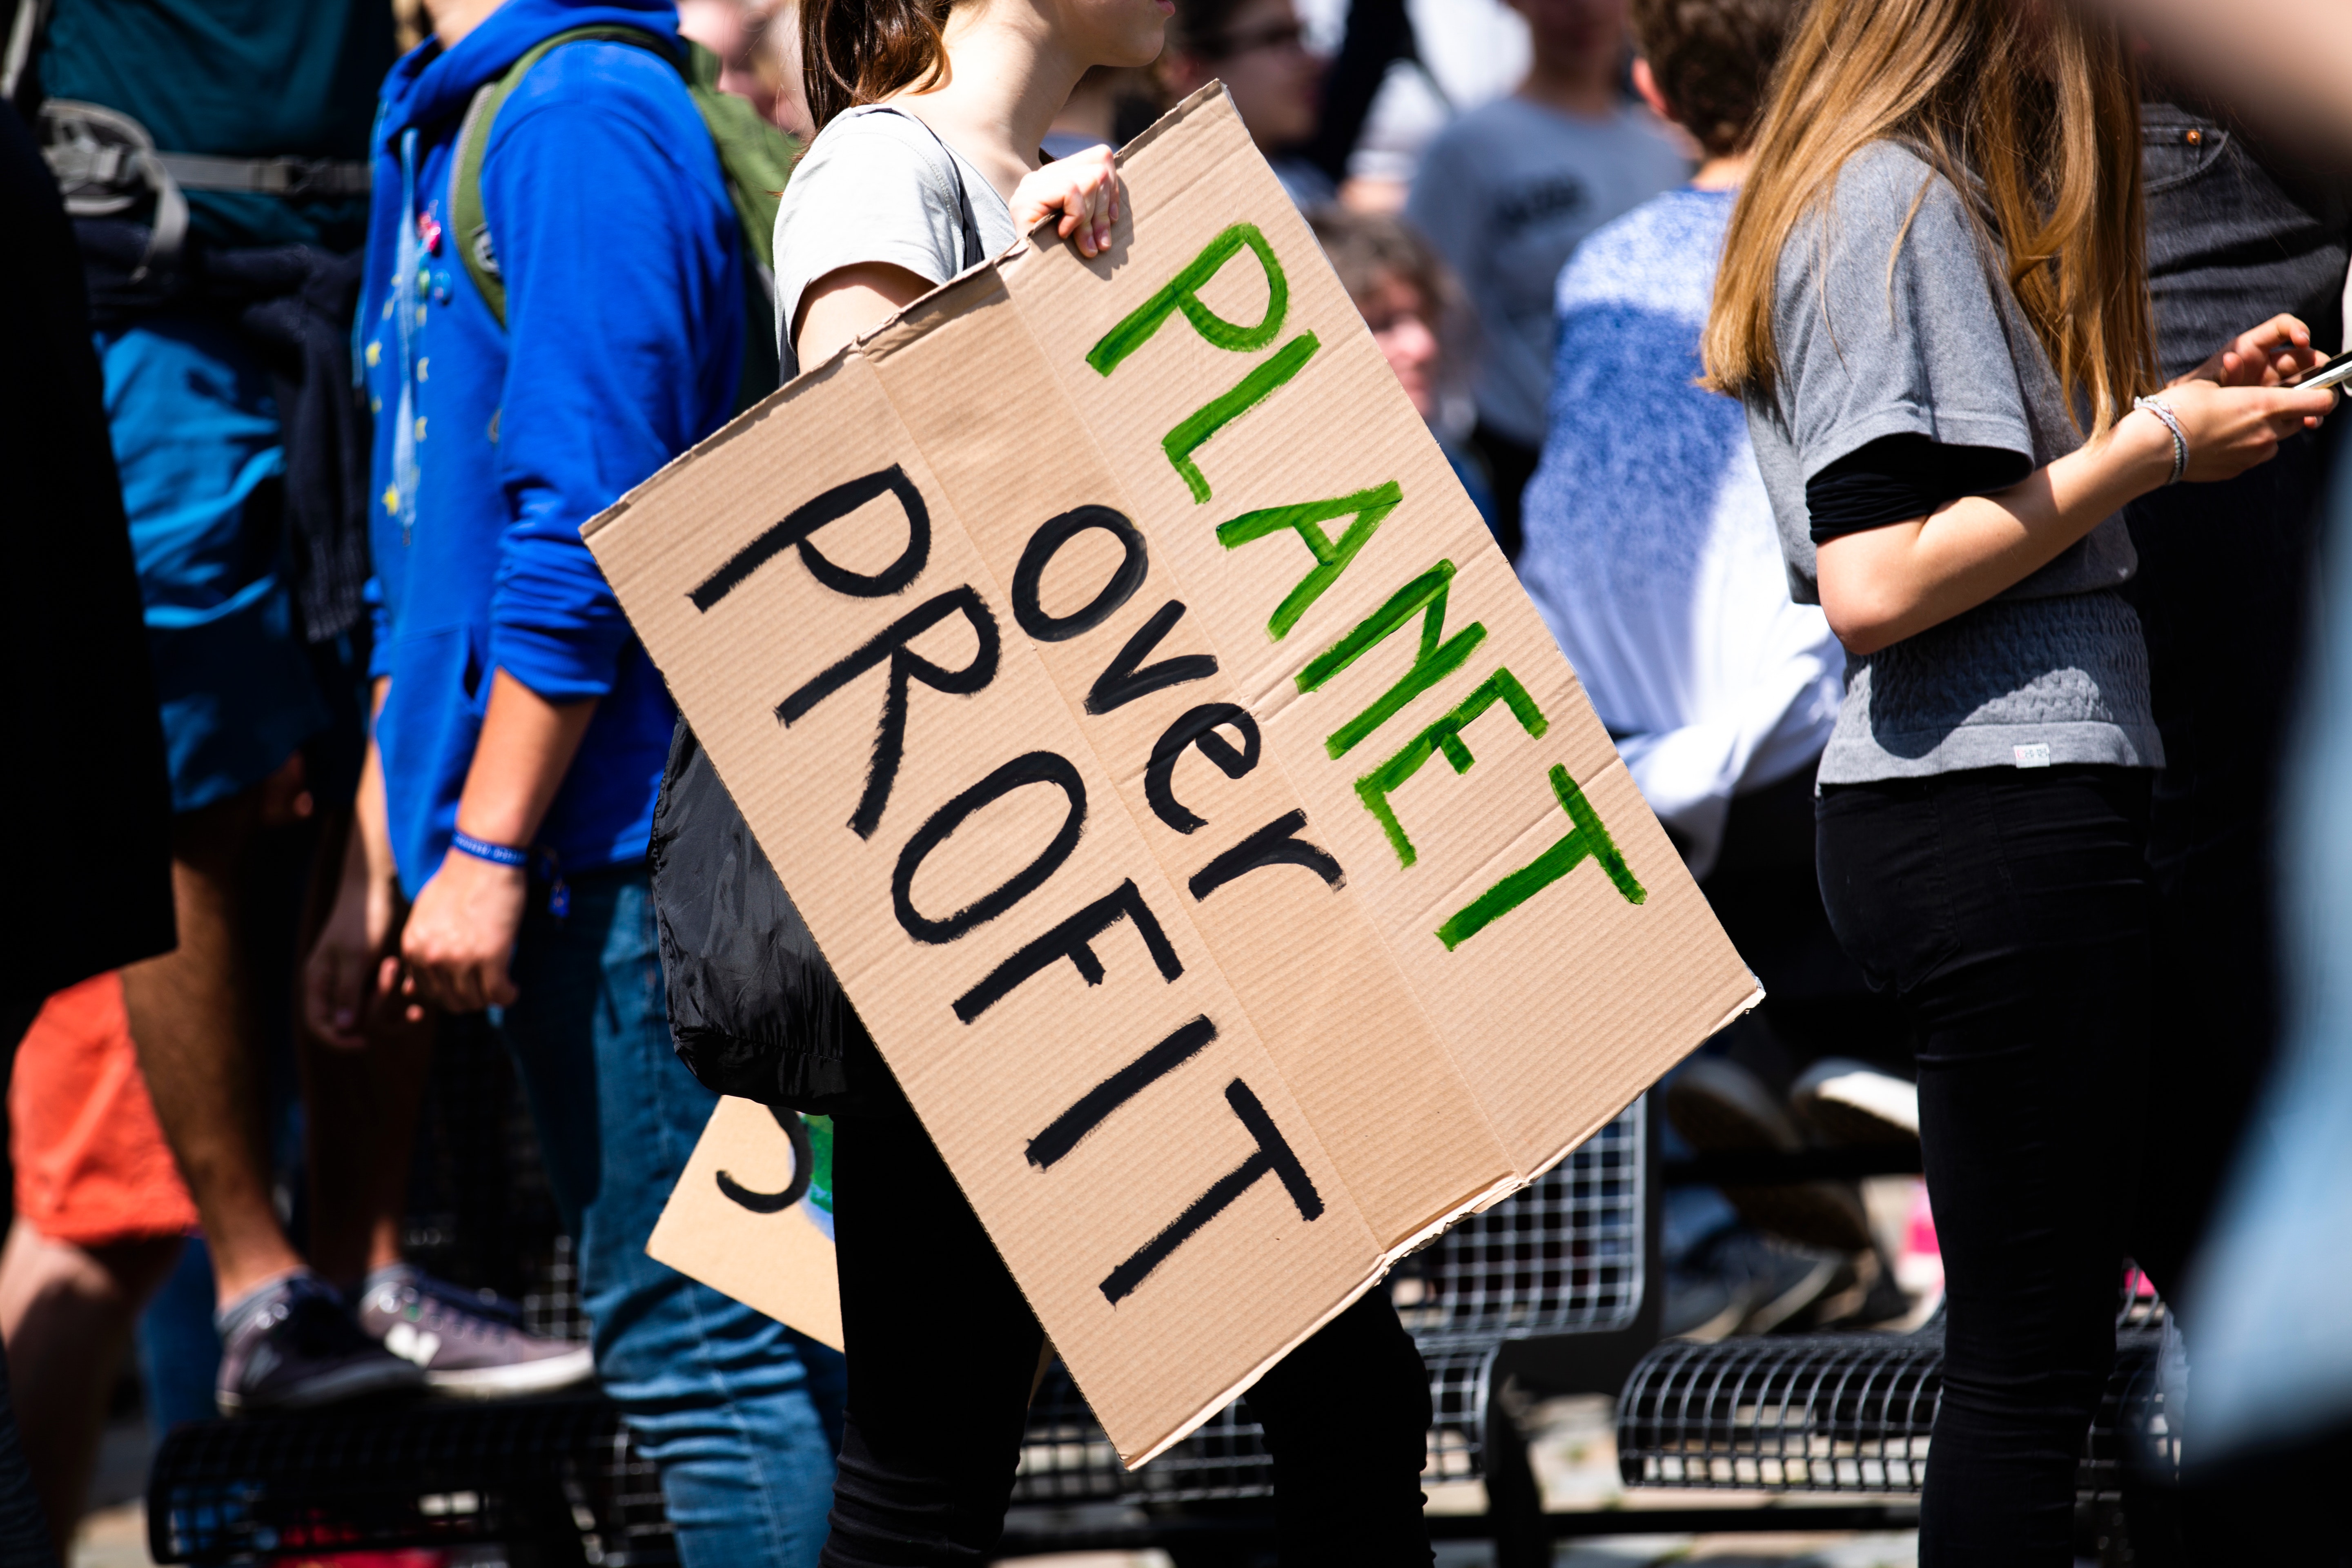 Sustainability in the Fashion Industry: Protest sign saying "Planet over Profit"